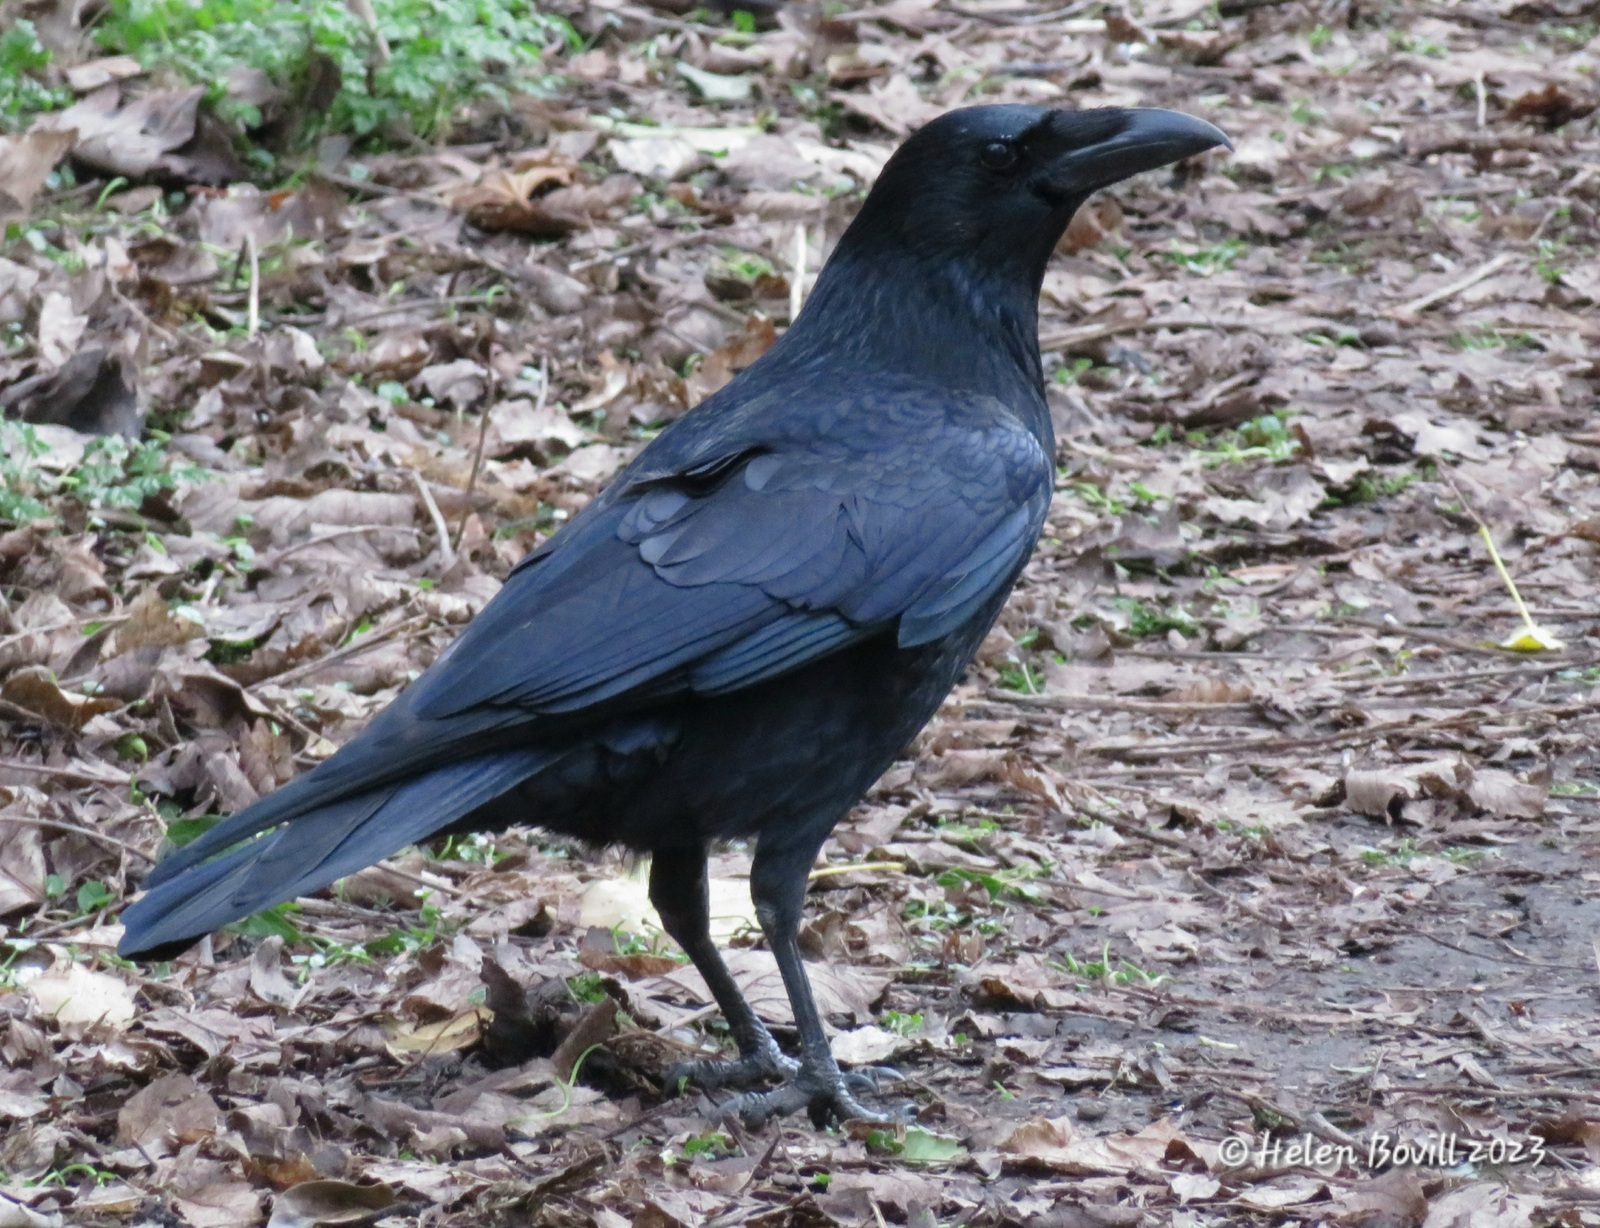 Carrion Crow on one of the paths in the cemetery